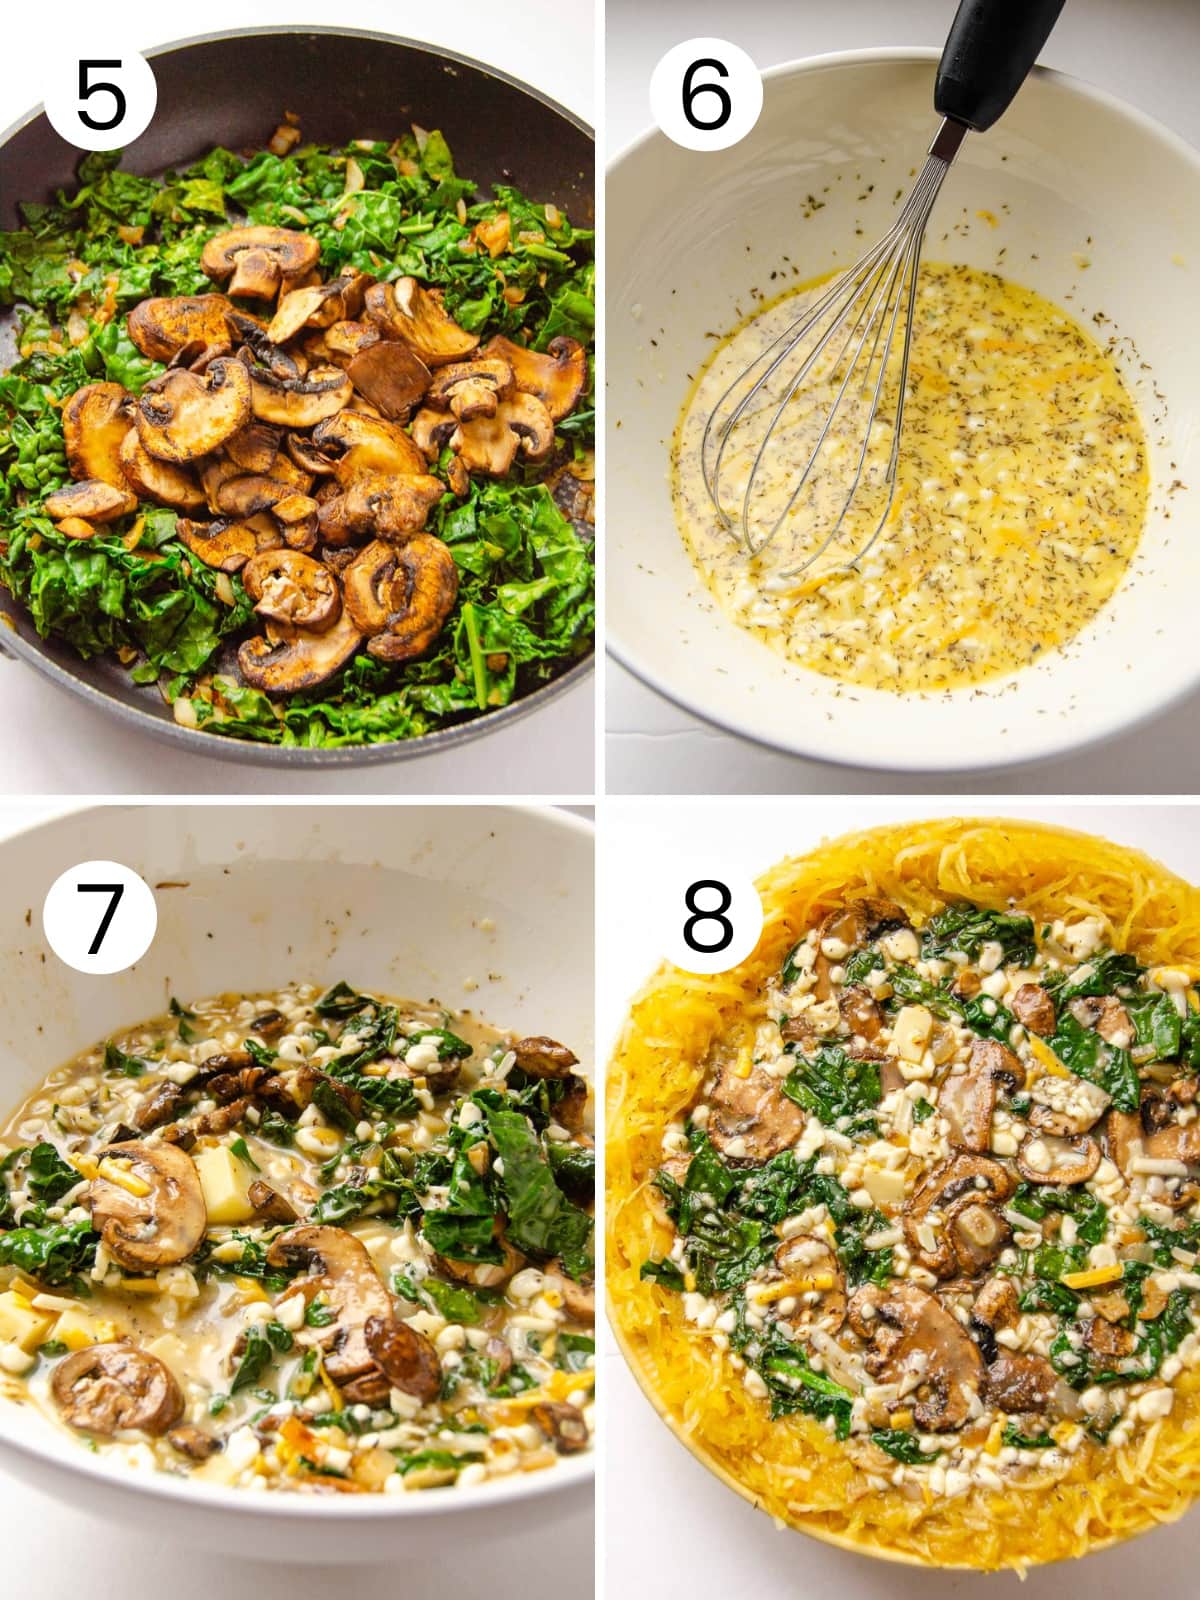 How to saute kale and mushrooms, prepare egg mixture and assemble the quiche.